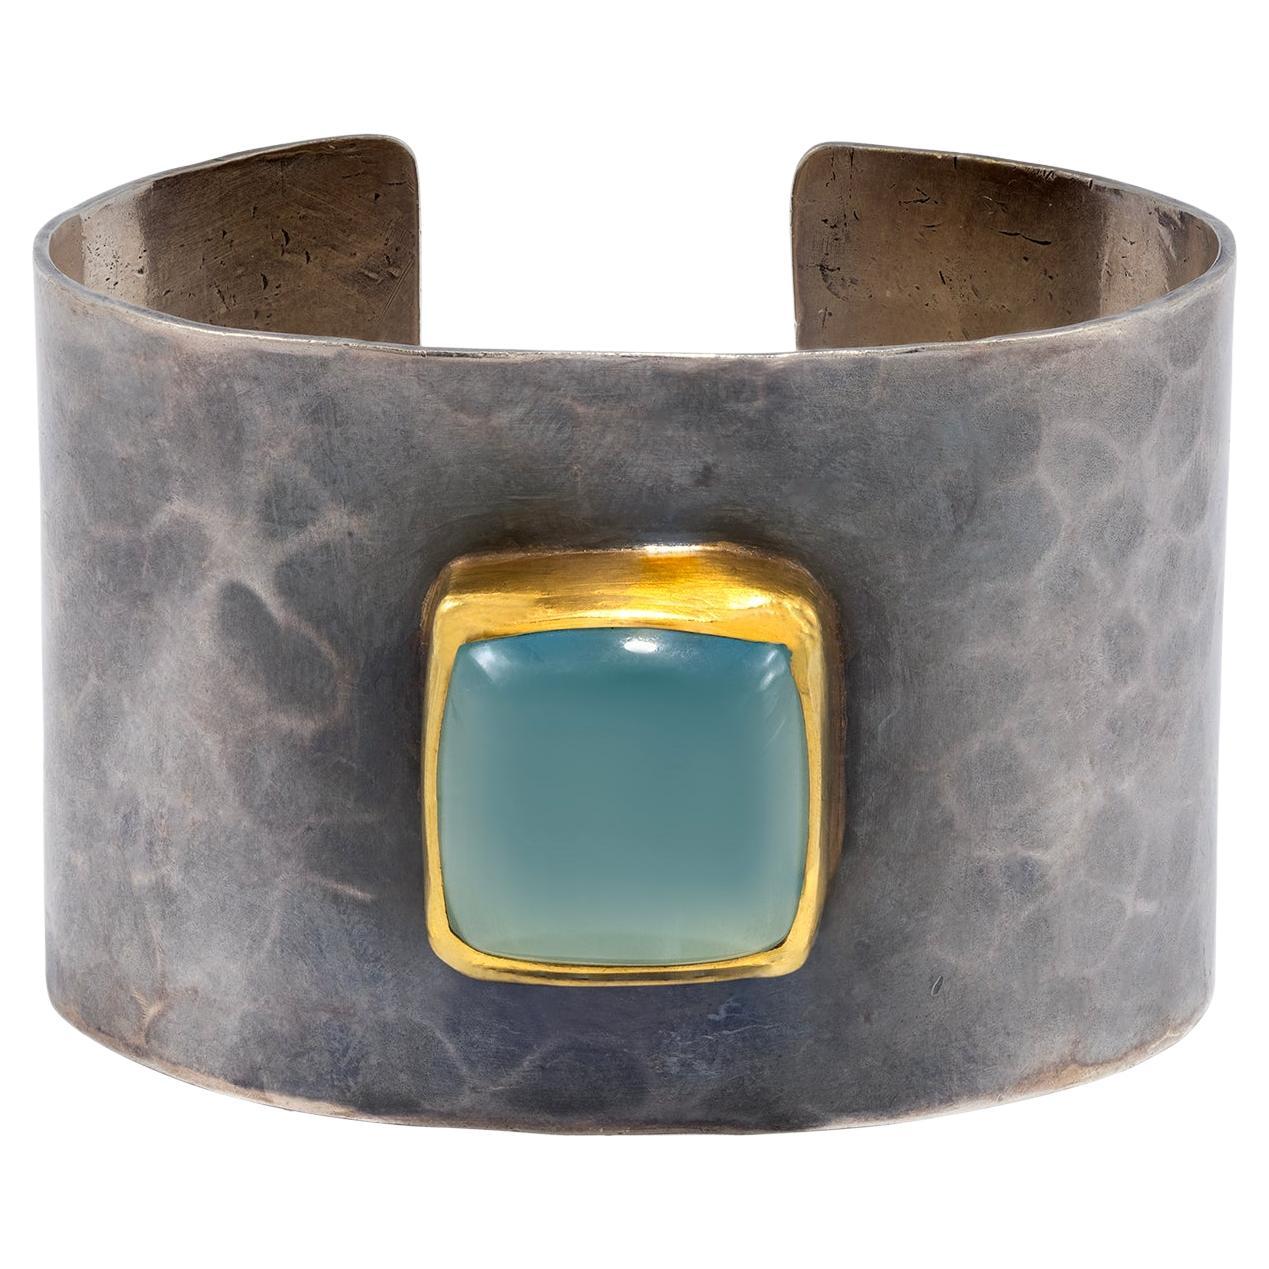 Goddess Cuff in Sterling Silver with Aqua Stone by Tagili Designs For Sale